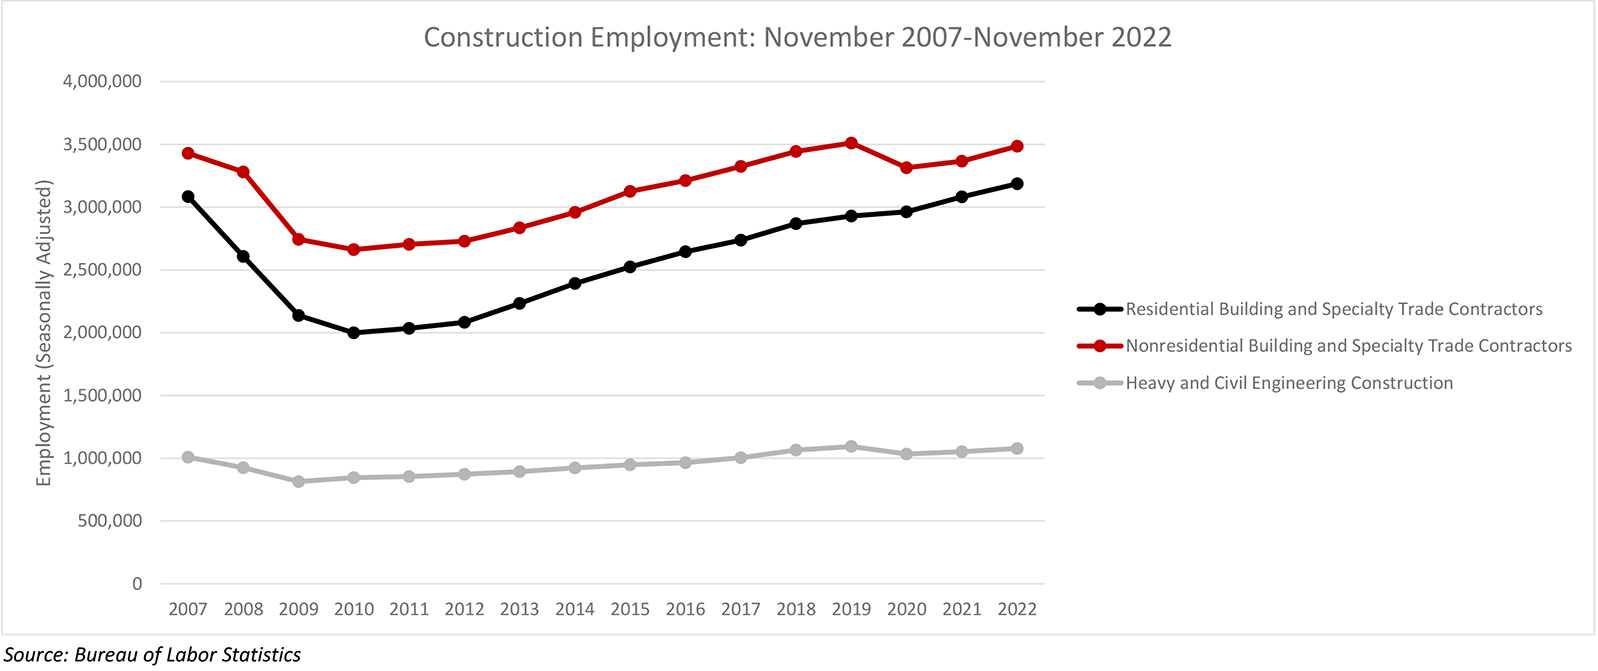 November Construction Employment Up by 20,000